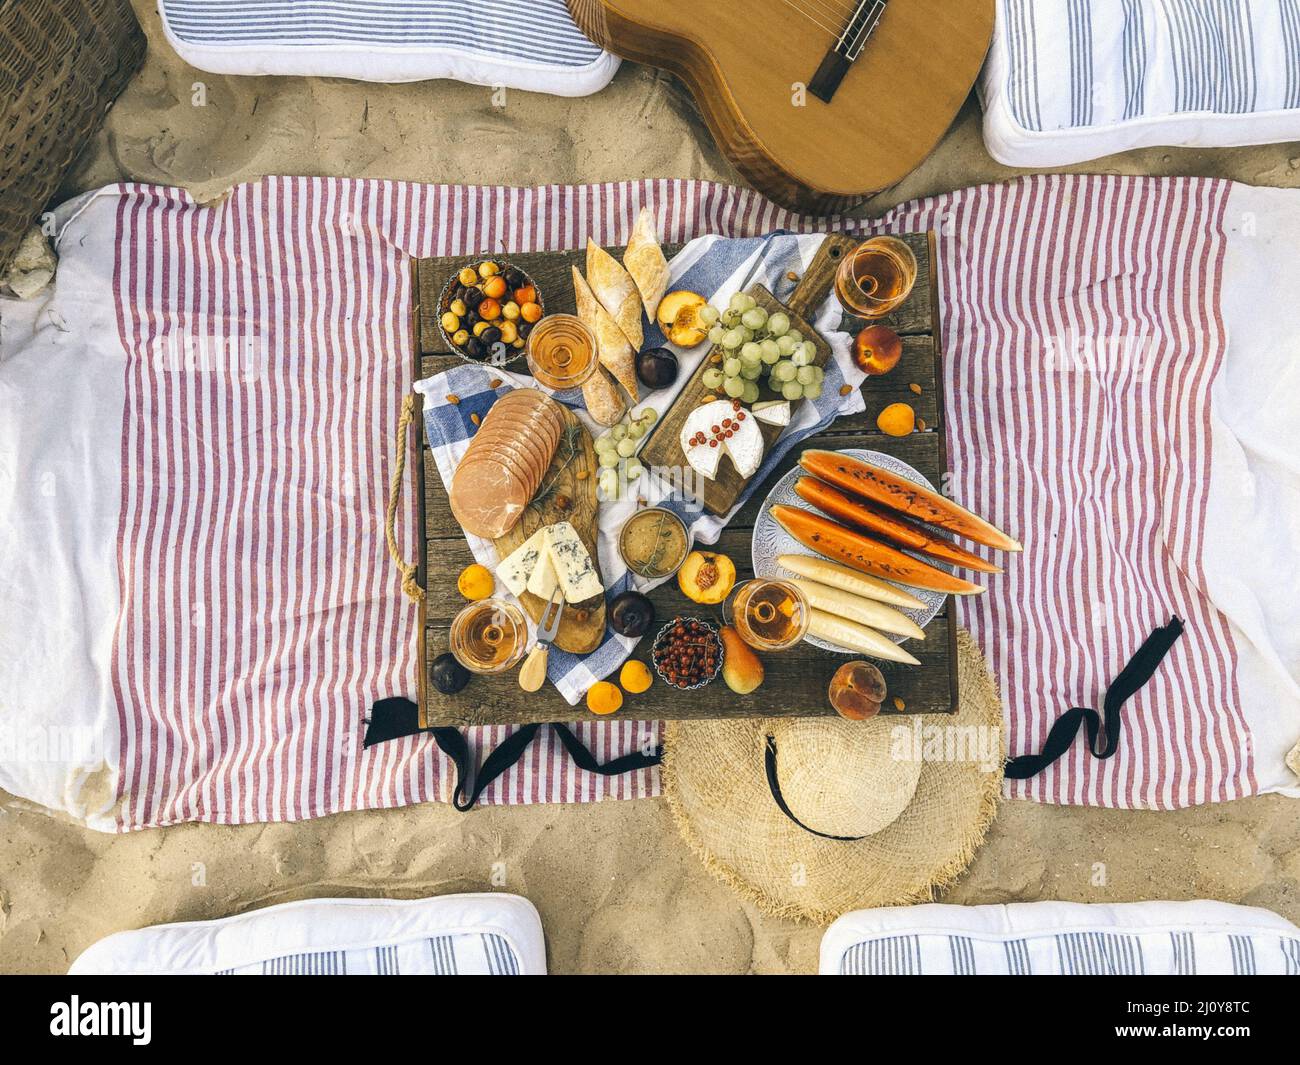 Delicious food on table on beach Stock Photo